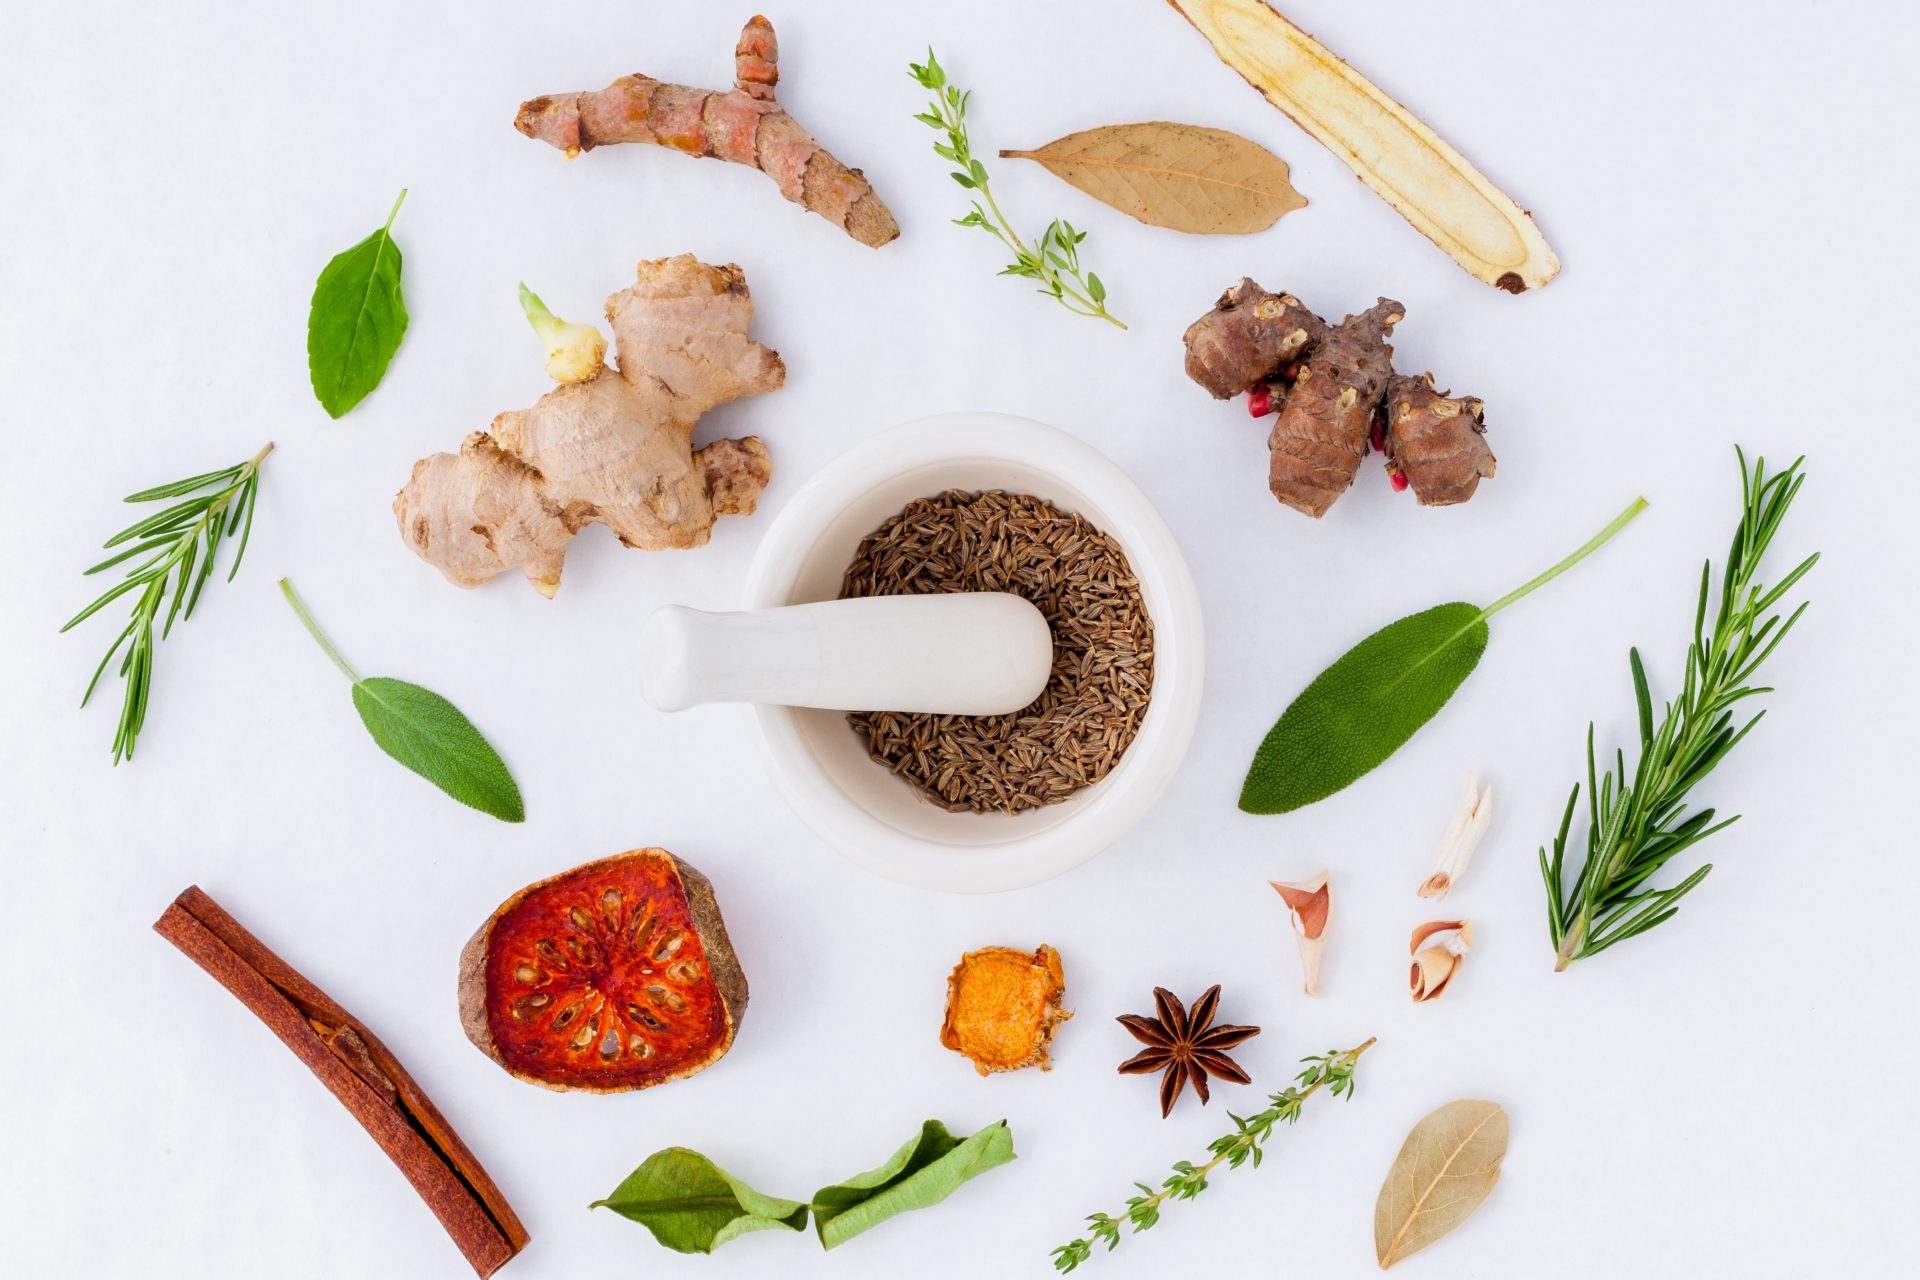 Spices, roots and plants